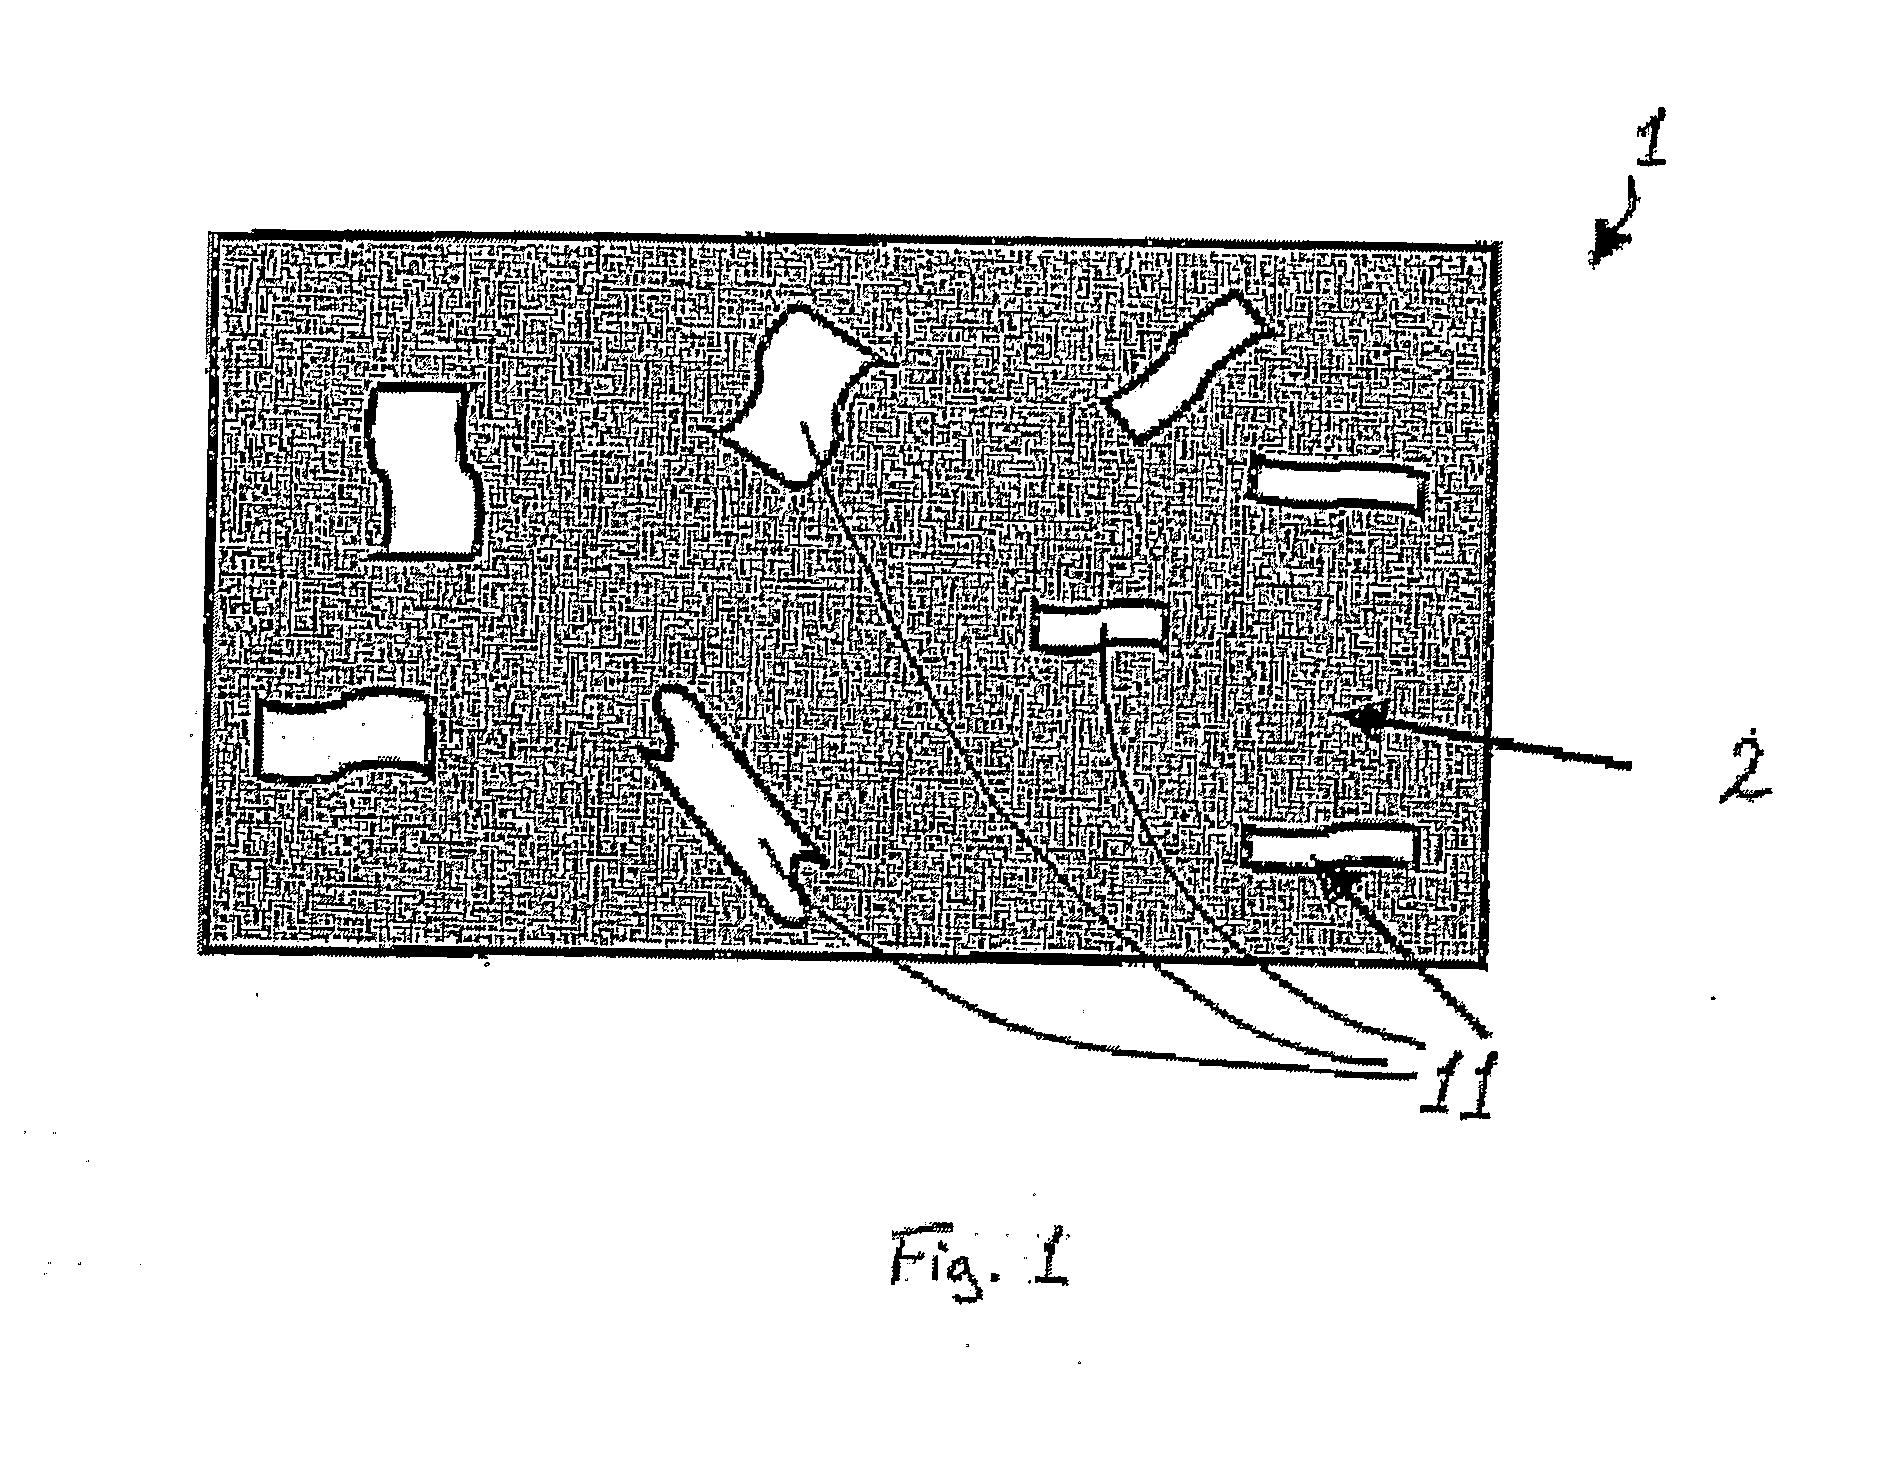 Geometrically Apertured Protective and/or Splint Device Comprising a Re-Mouldable Thermoplastic Material